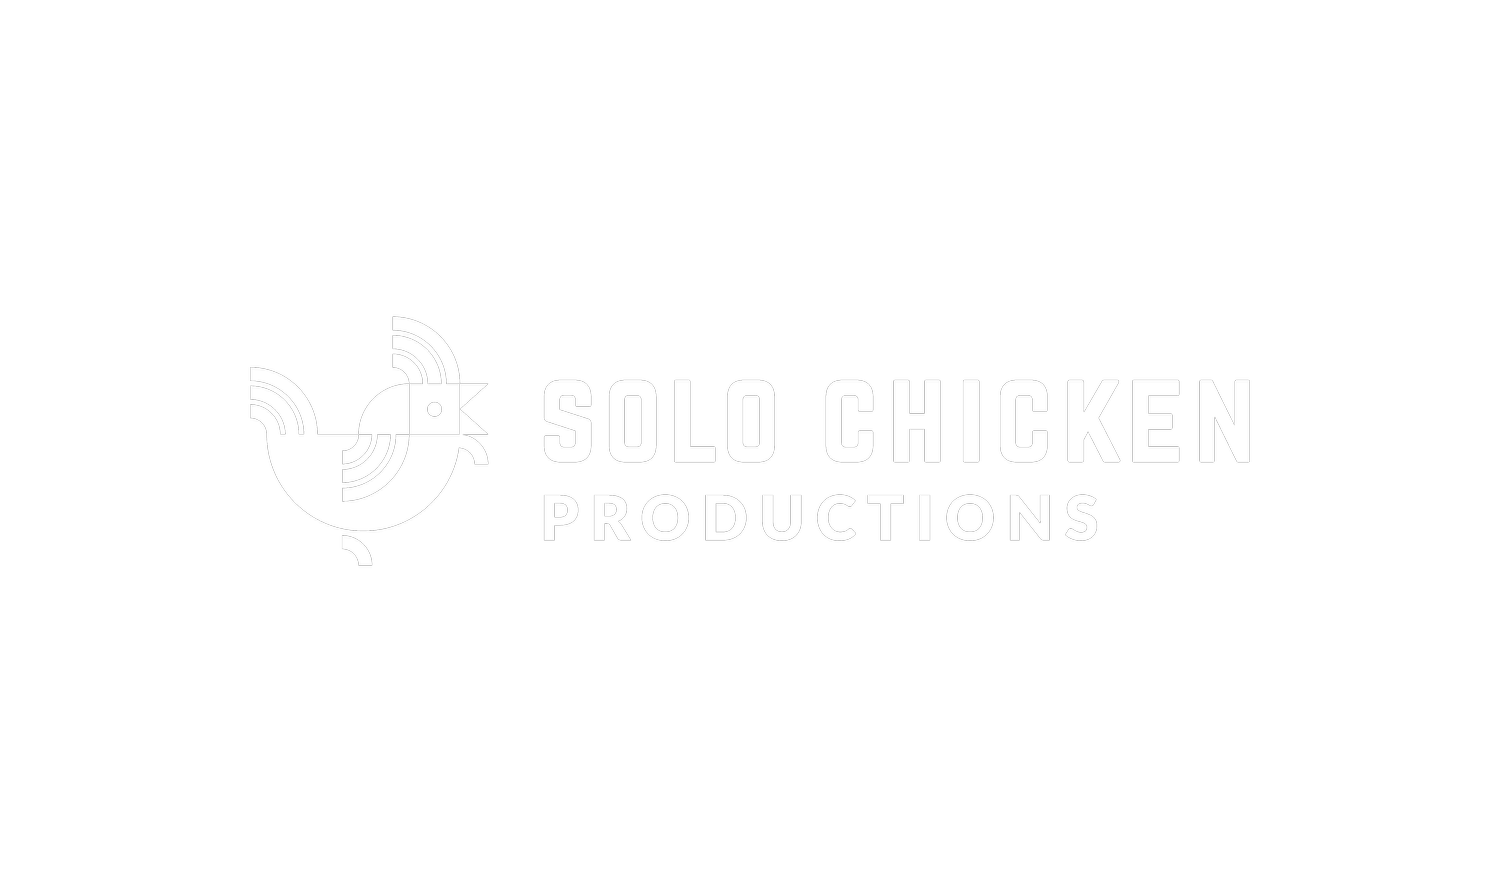 Solo Chicken Productions